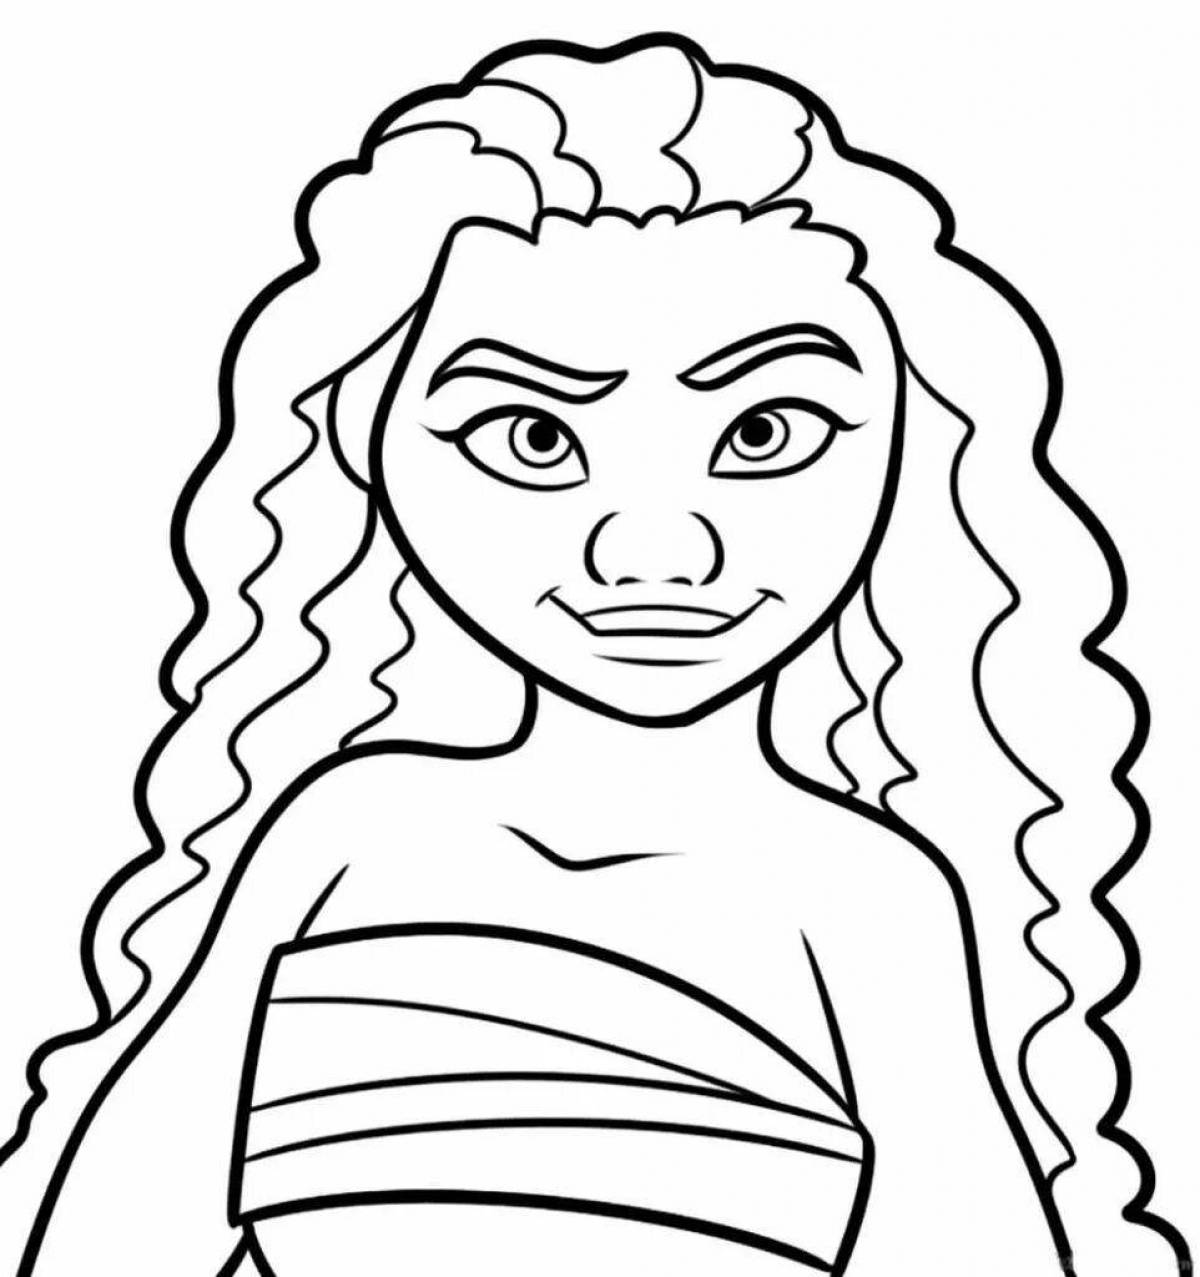 Adorable moana coloring book for kids